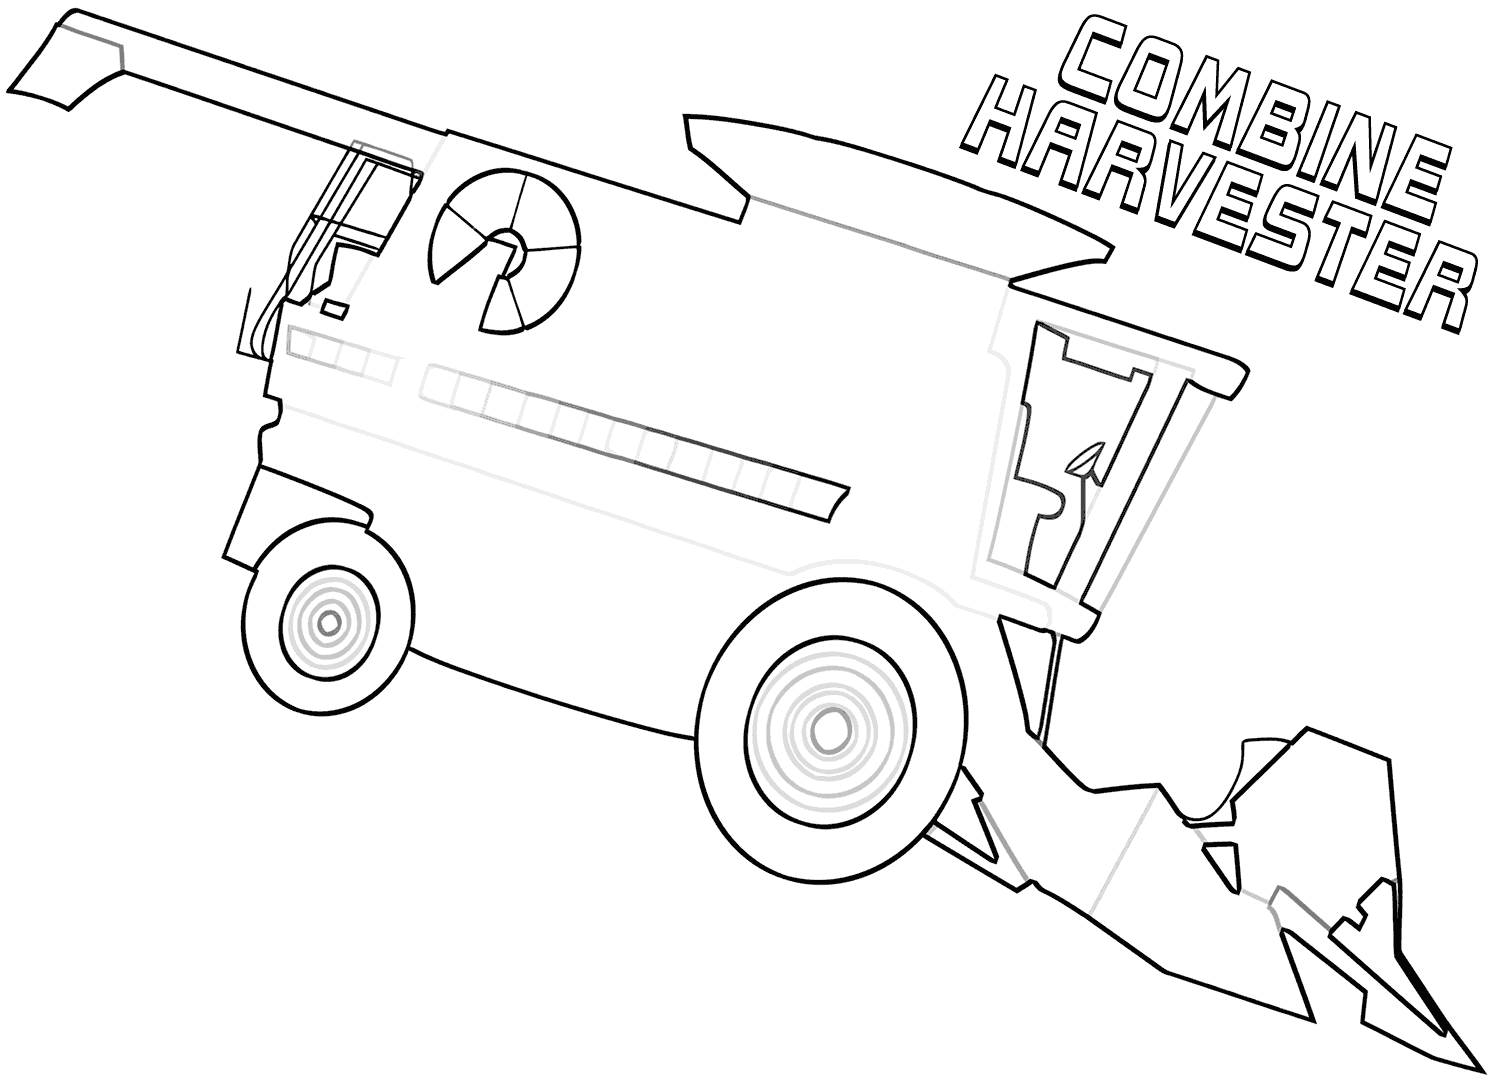 combine harvester colouring pages combine harvester coloring pages coloring pages to colouring pages harvester combine 